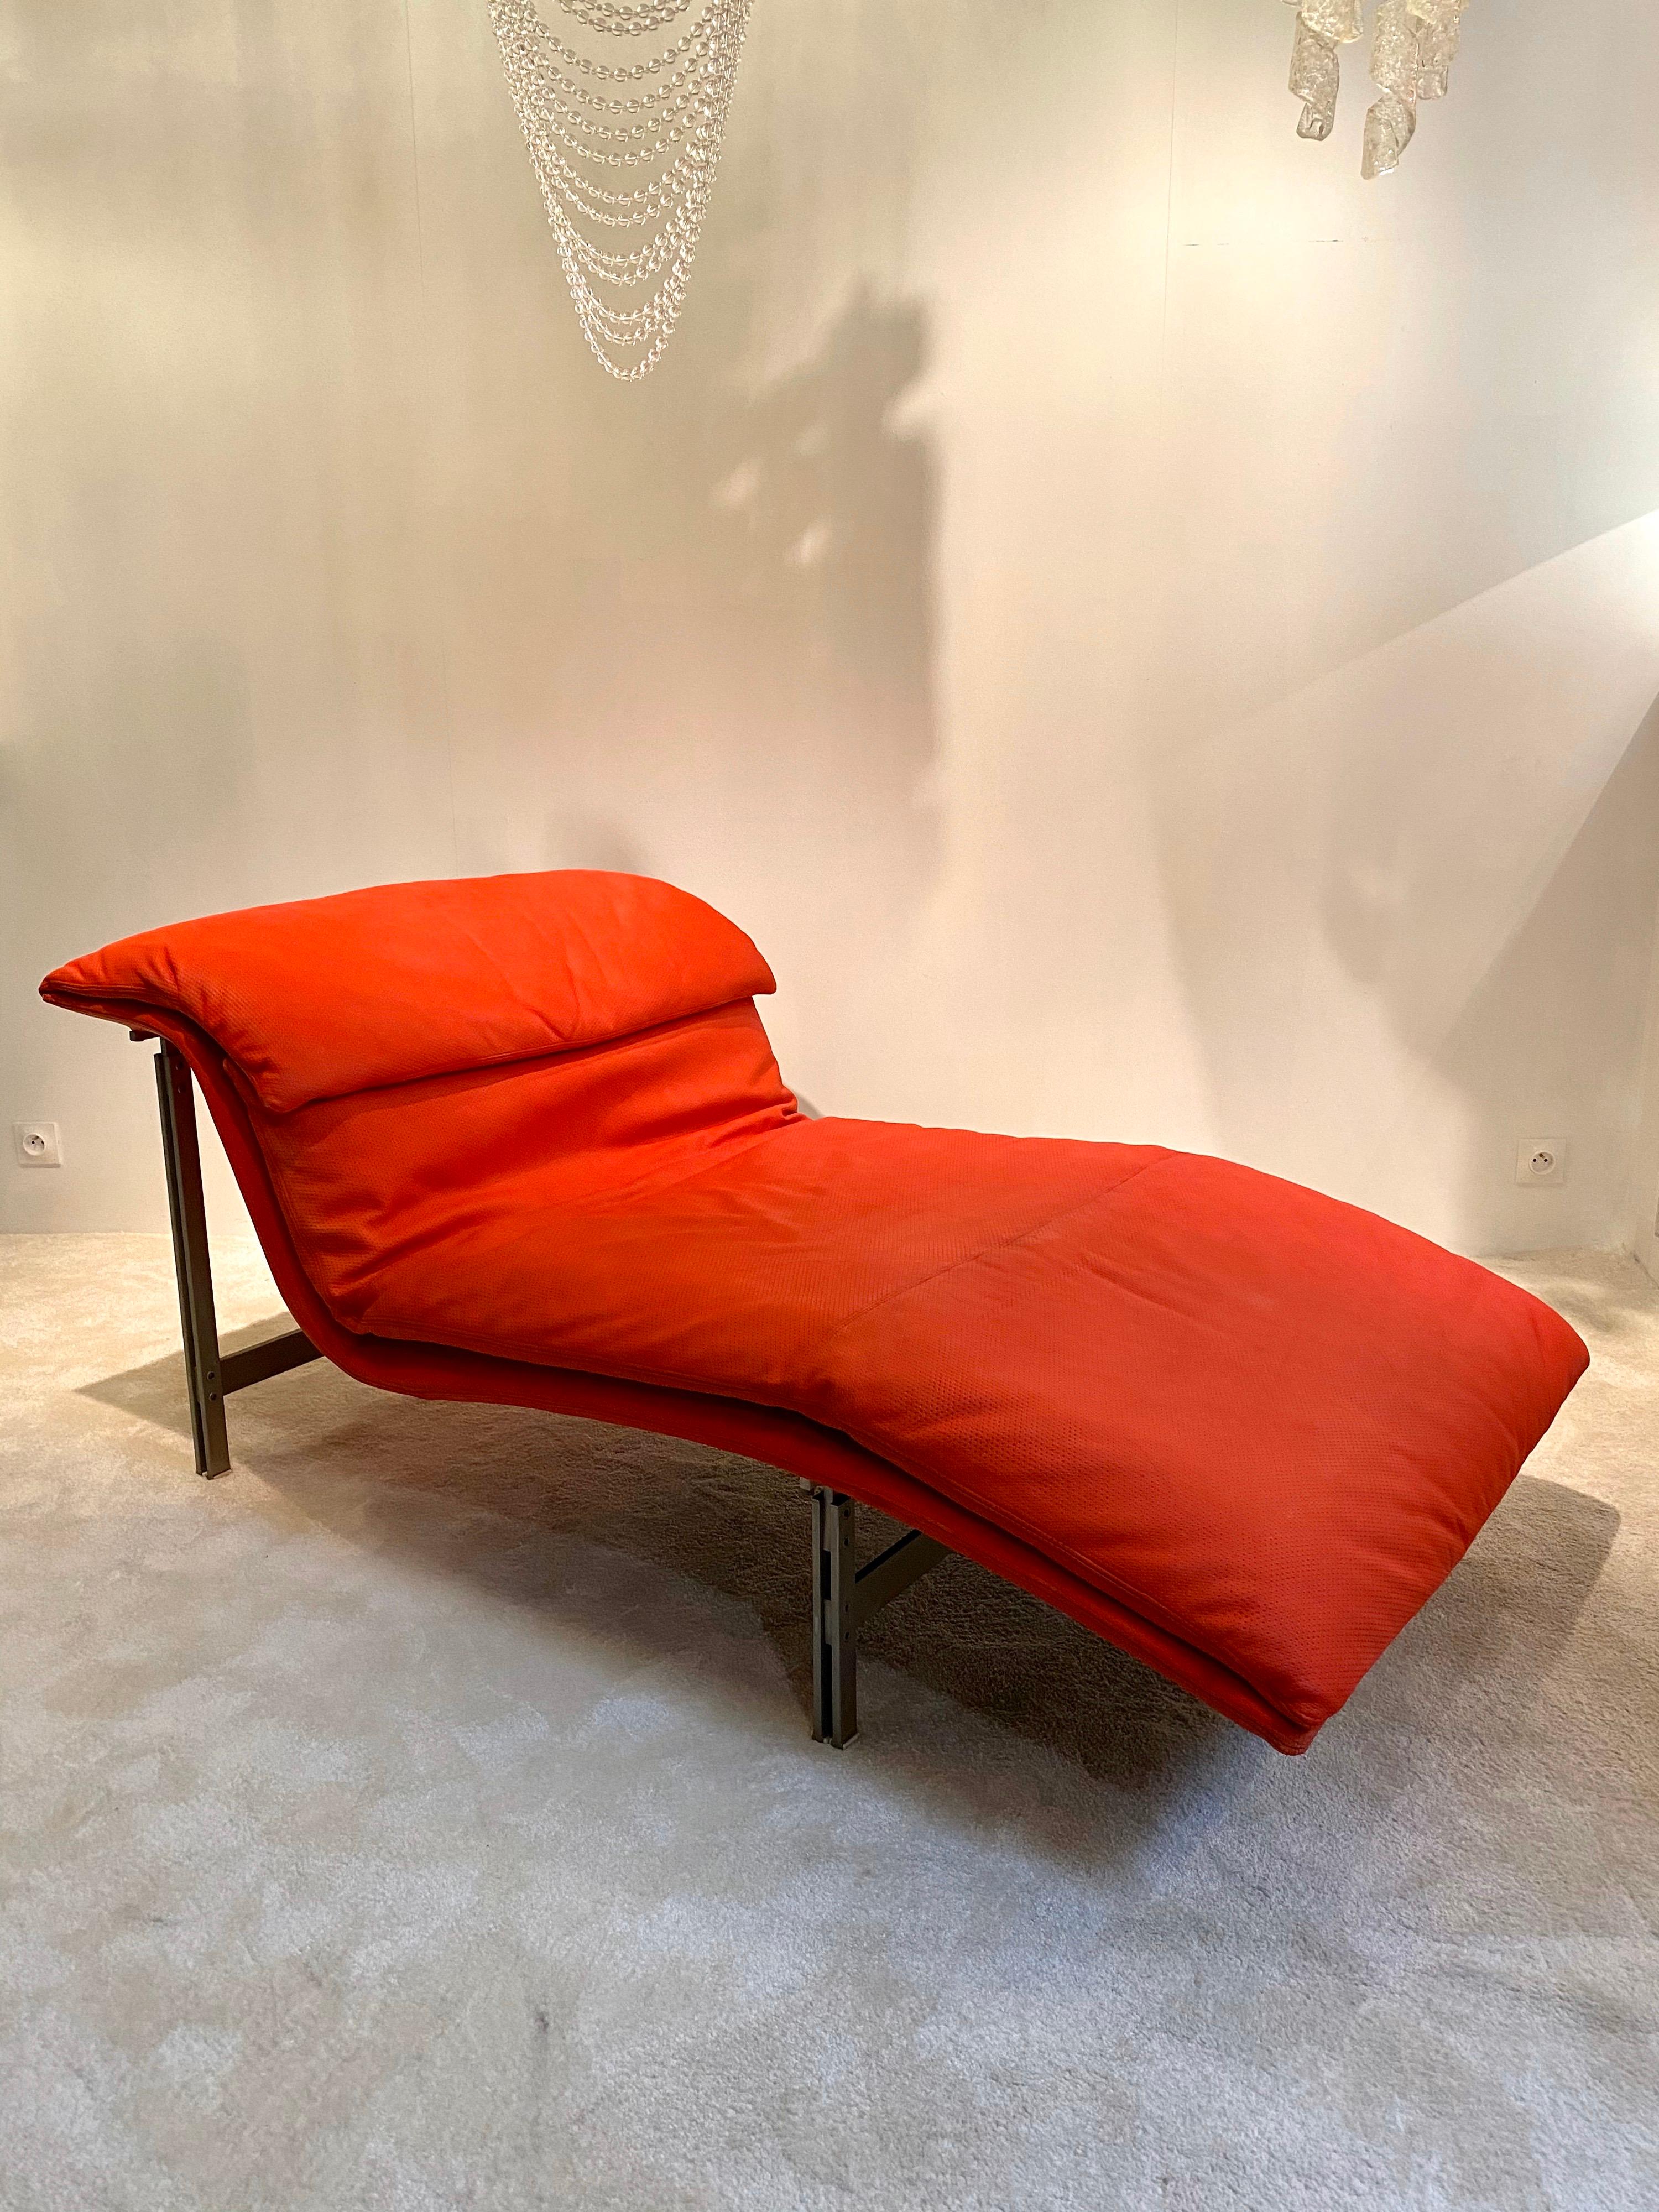 Mid-Century Modern Giovanni Offredi “Wave” Lounge Chair for Saporiti, 1974 For Sale